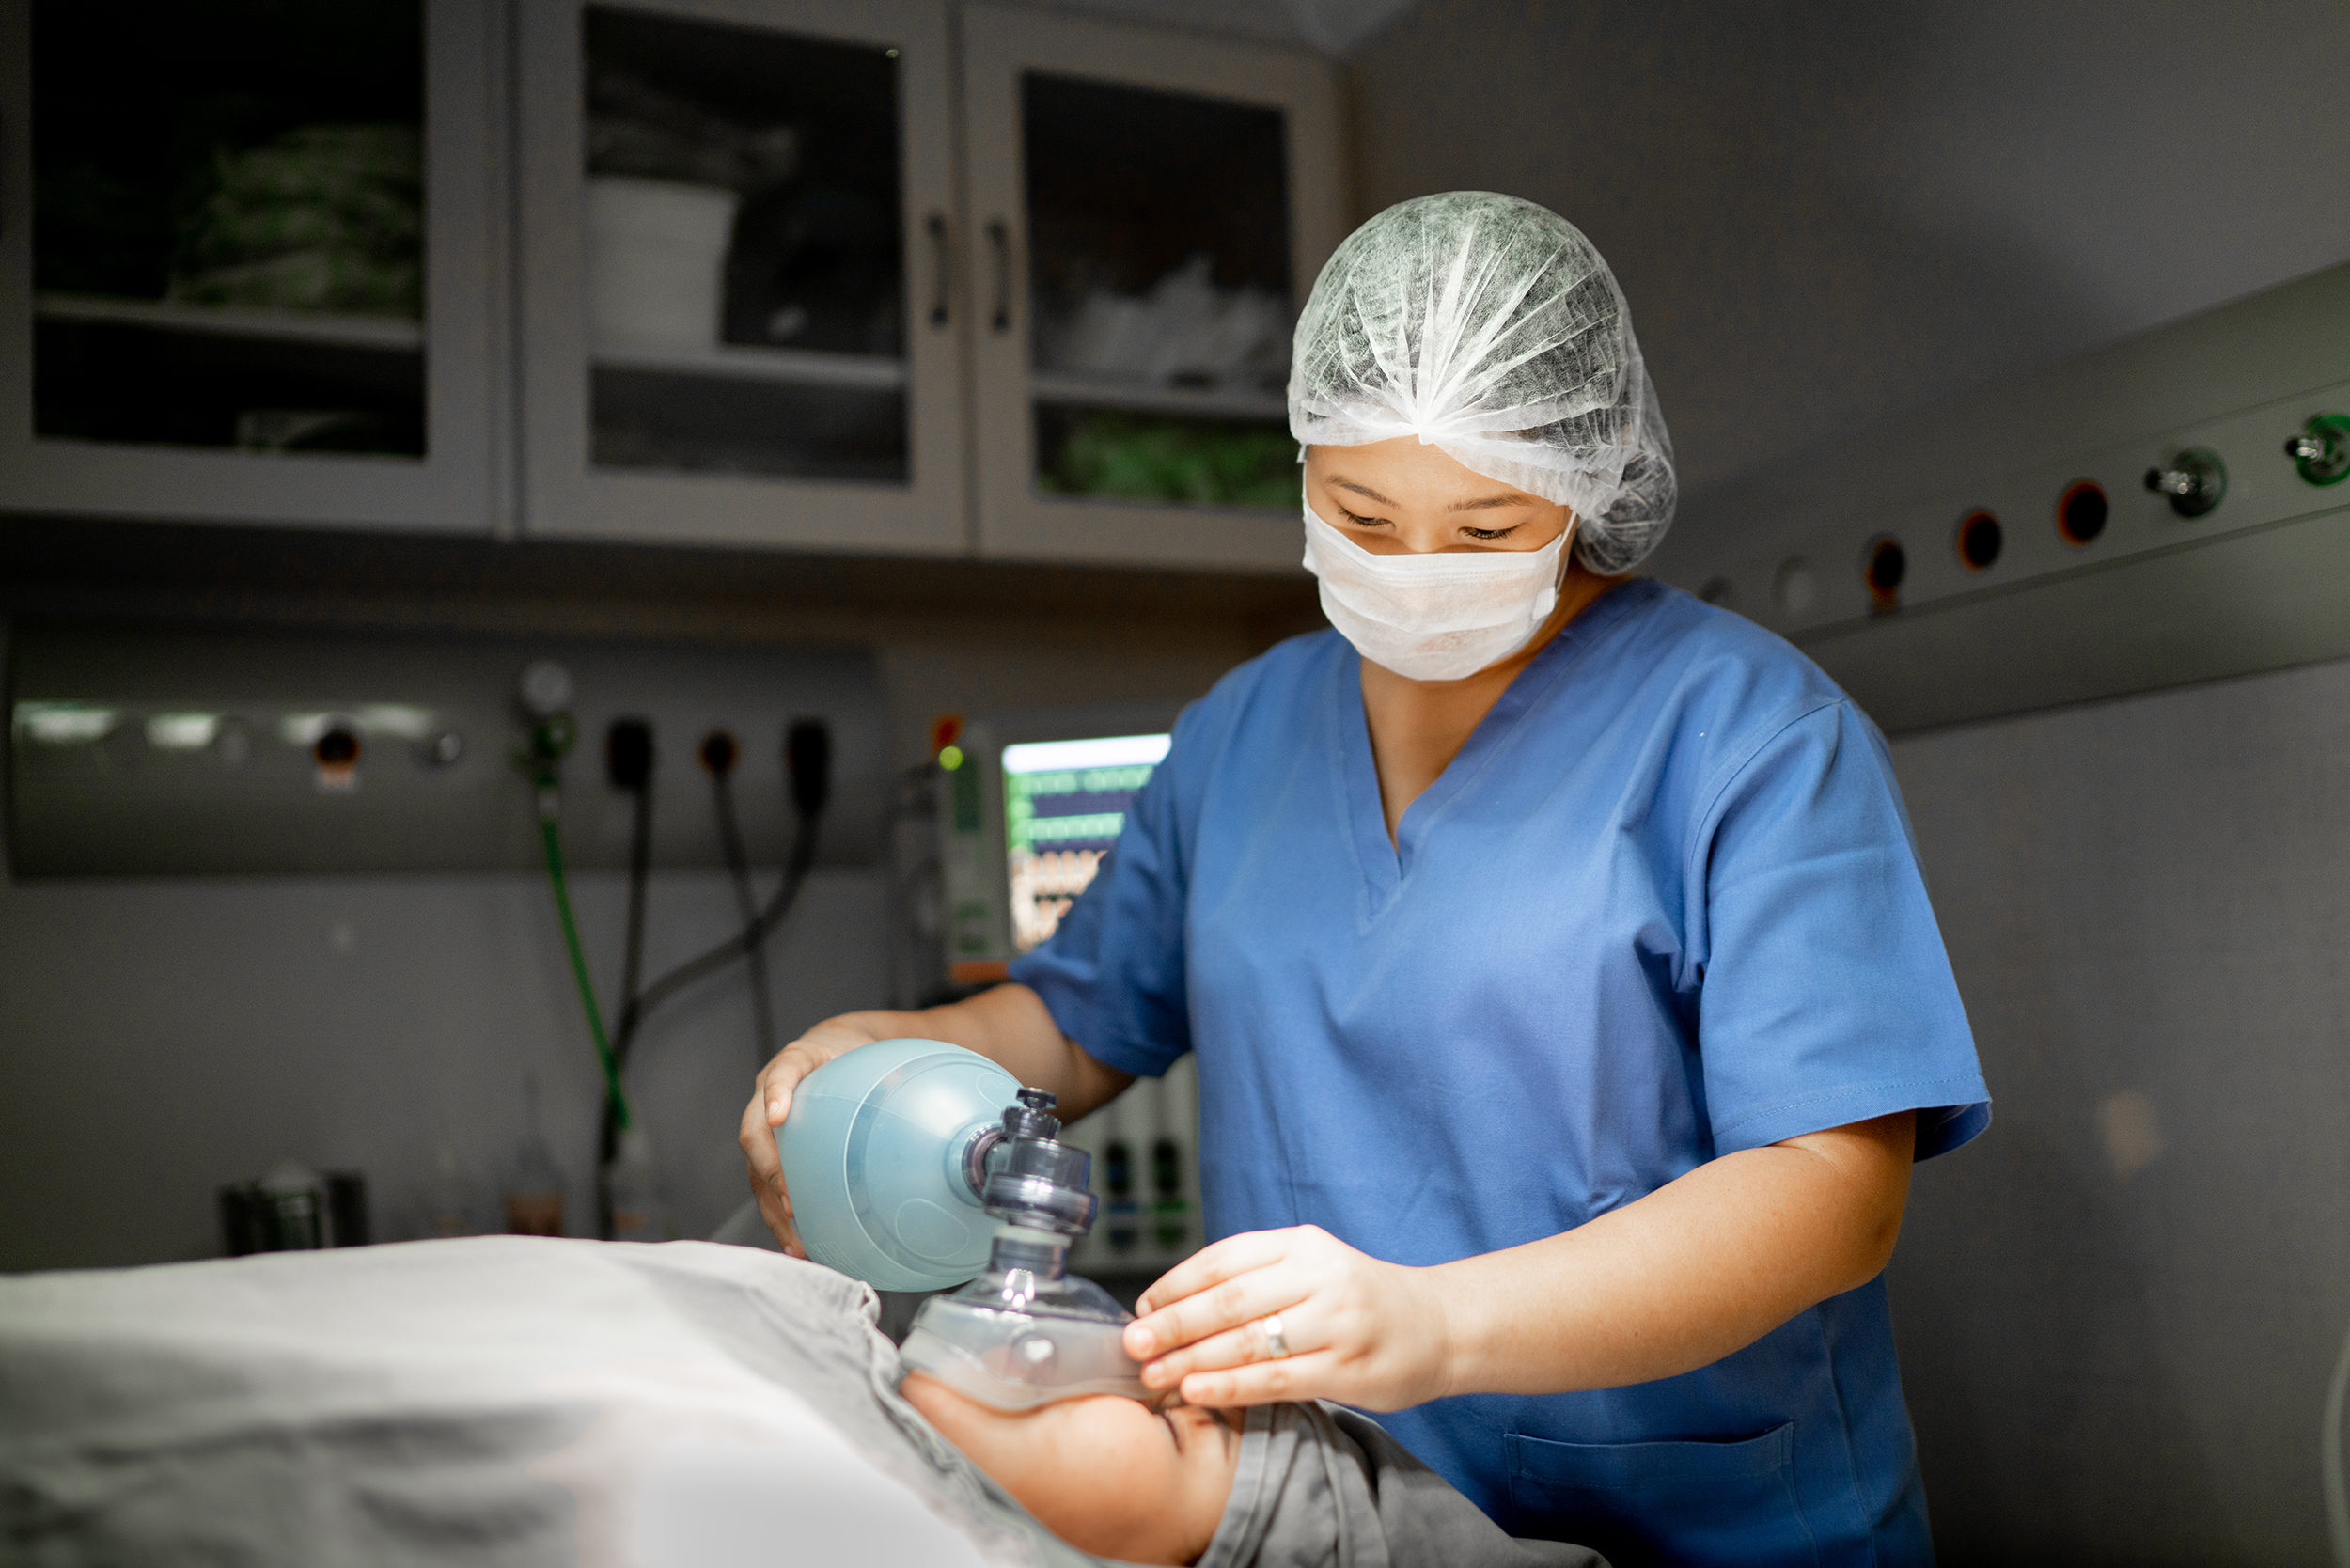 An anesthesiologist administers anesthesia to a patient in this image. In collaboration with an anesthesiologist or the surgeon, CRNAs who work in an ambulatory surgery center administer anesthesia to patients prior to surgery. They also may assist in pain management before and after the procedure.